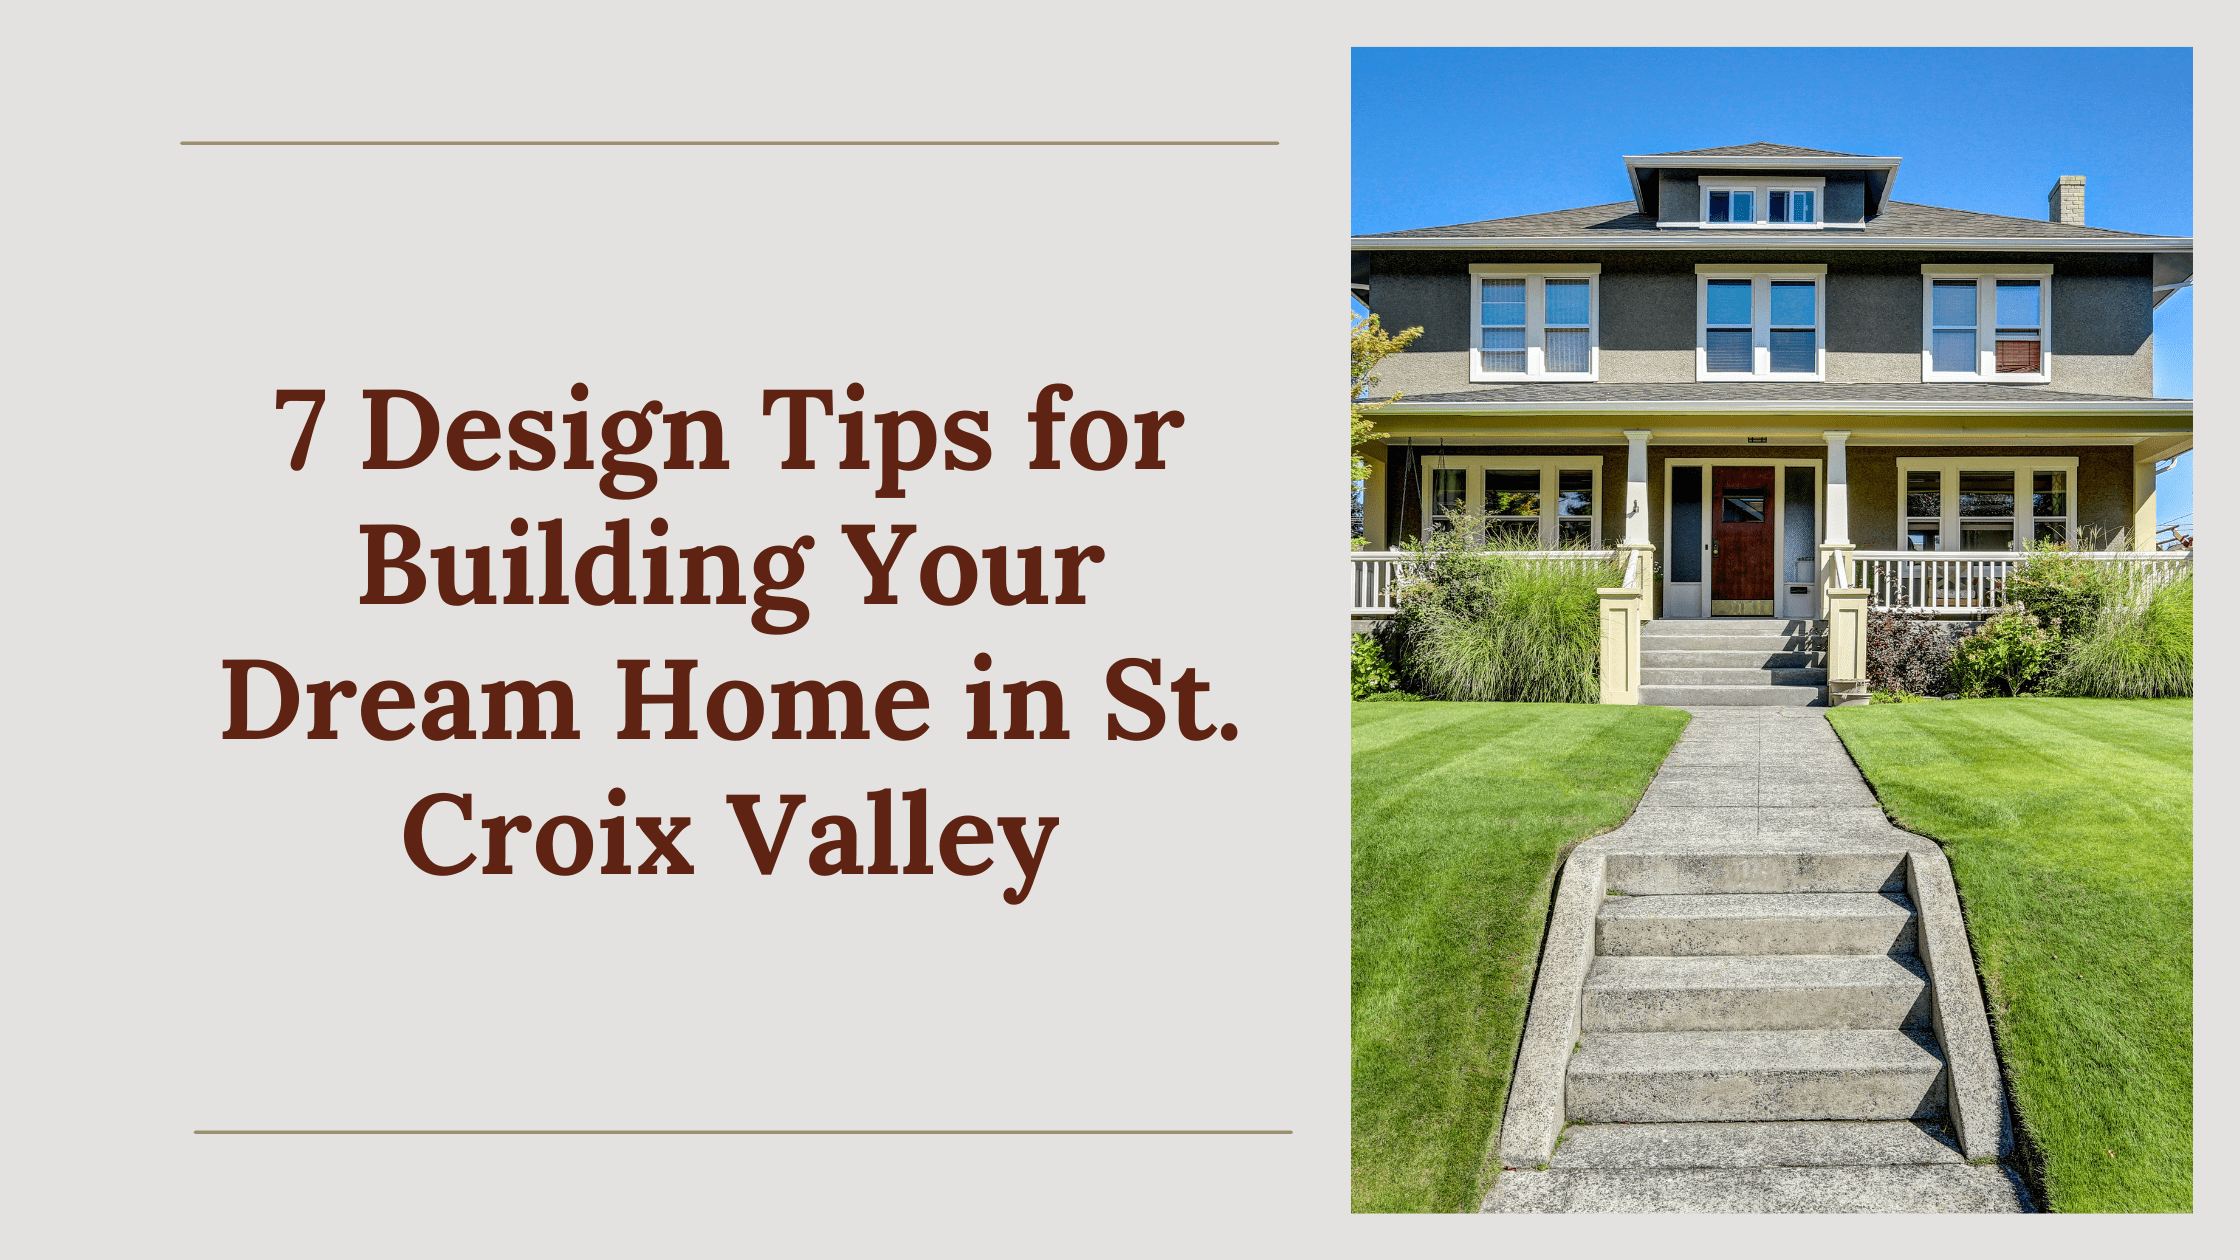 Design Tips for Building Your Dream Home